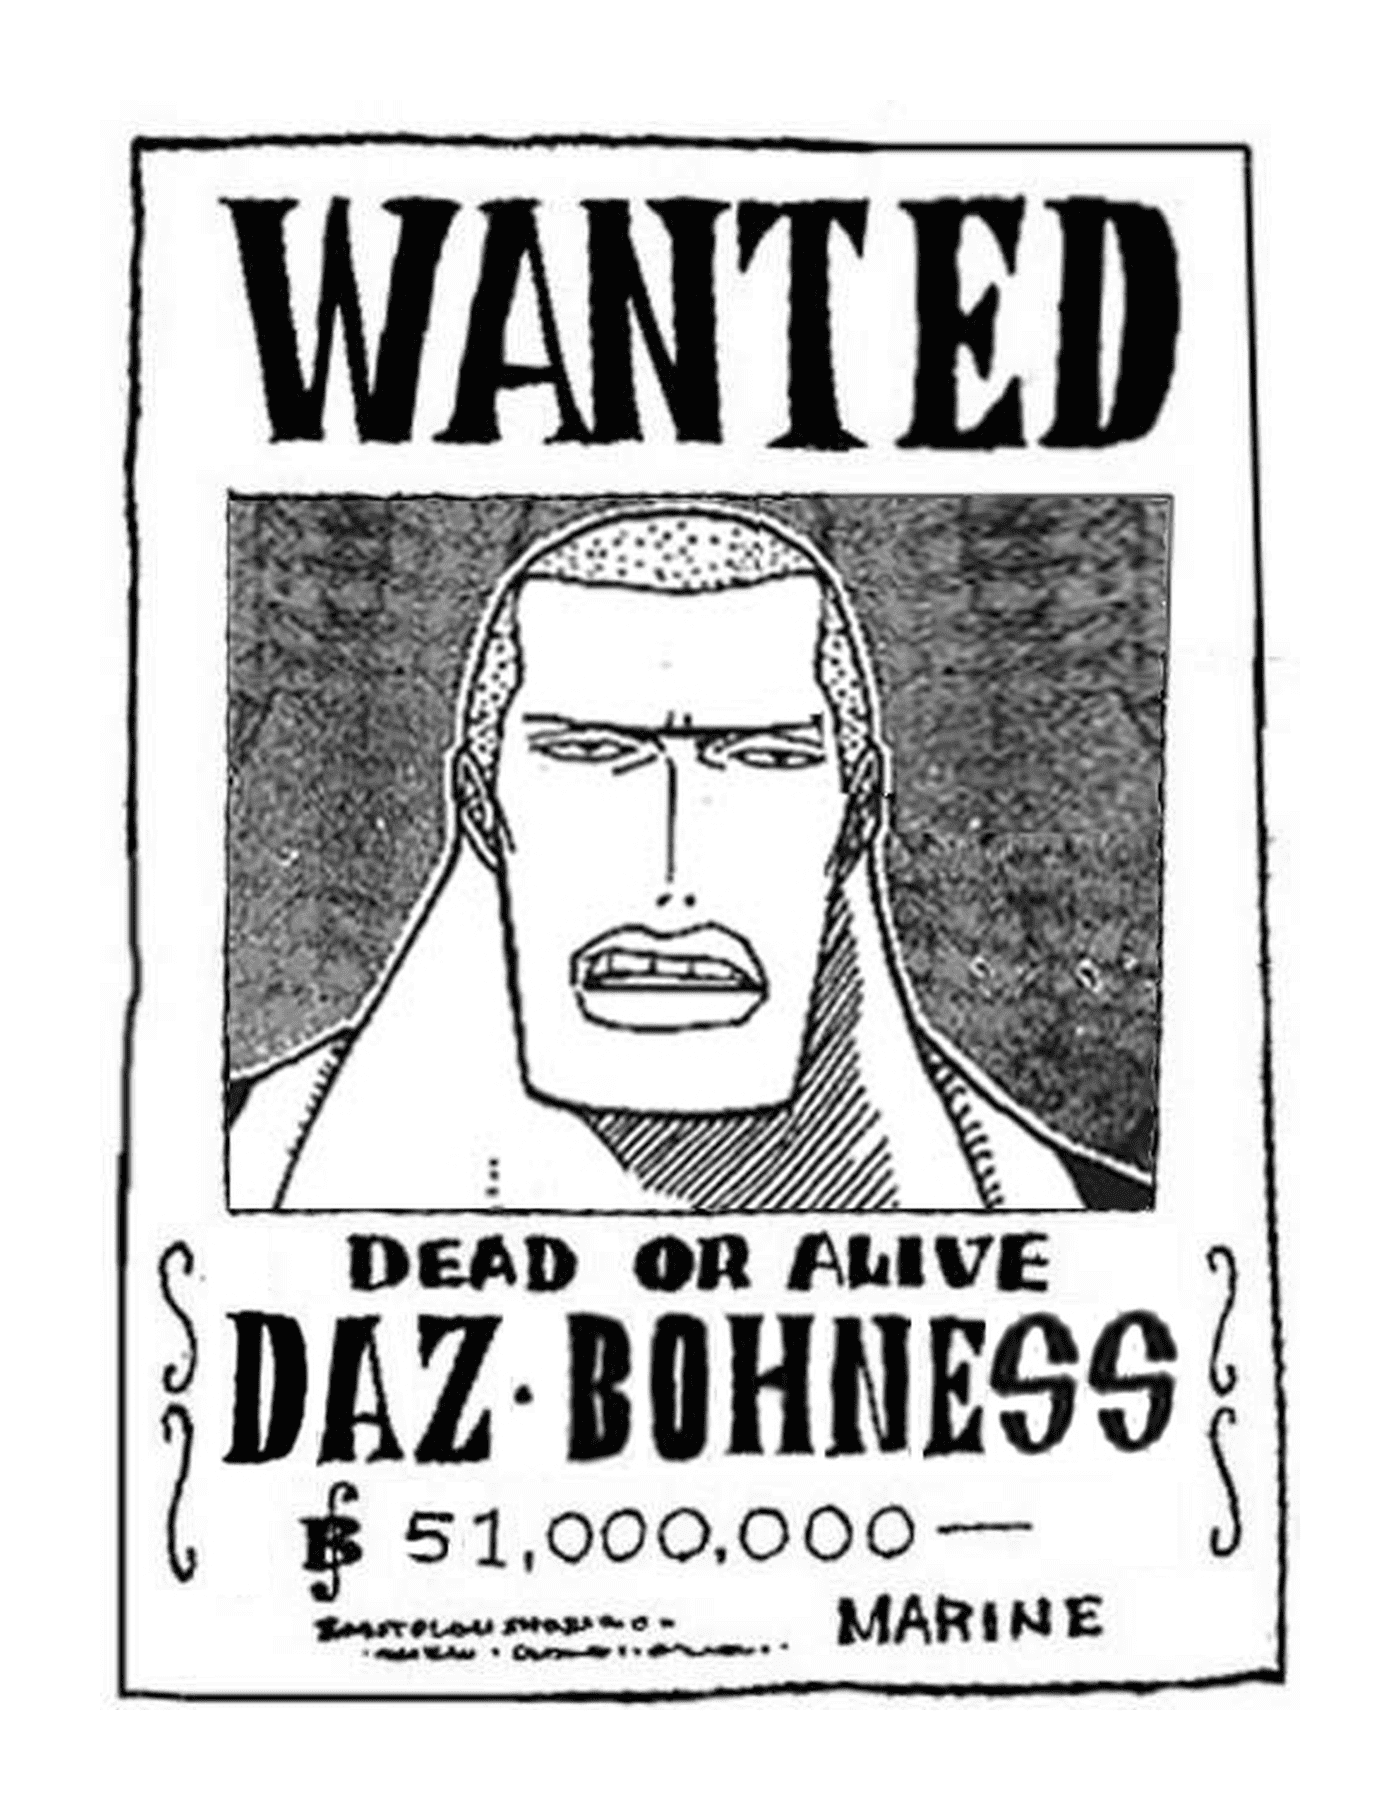  Wanted Daz Bohness, dead or alive 